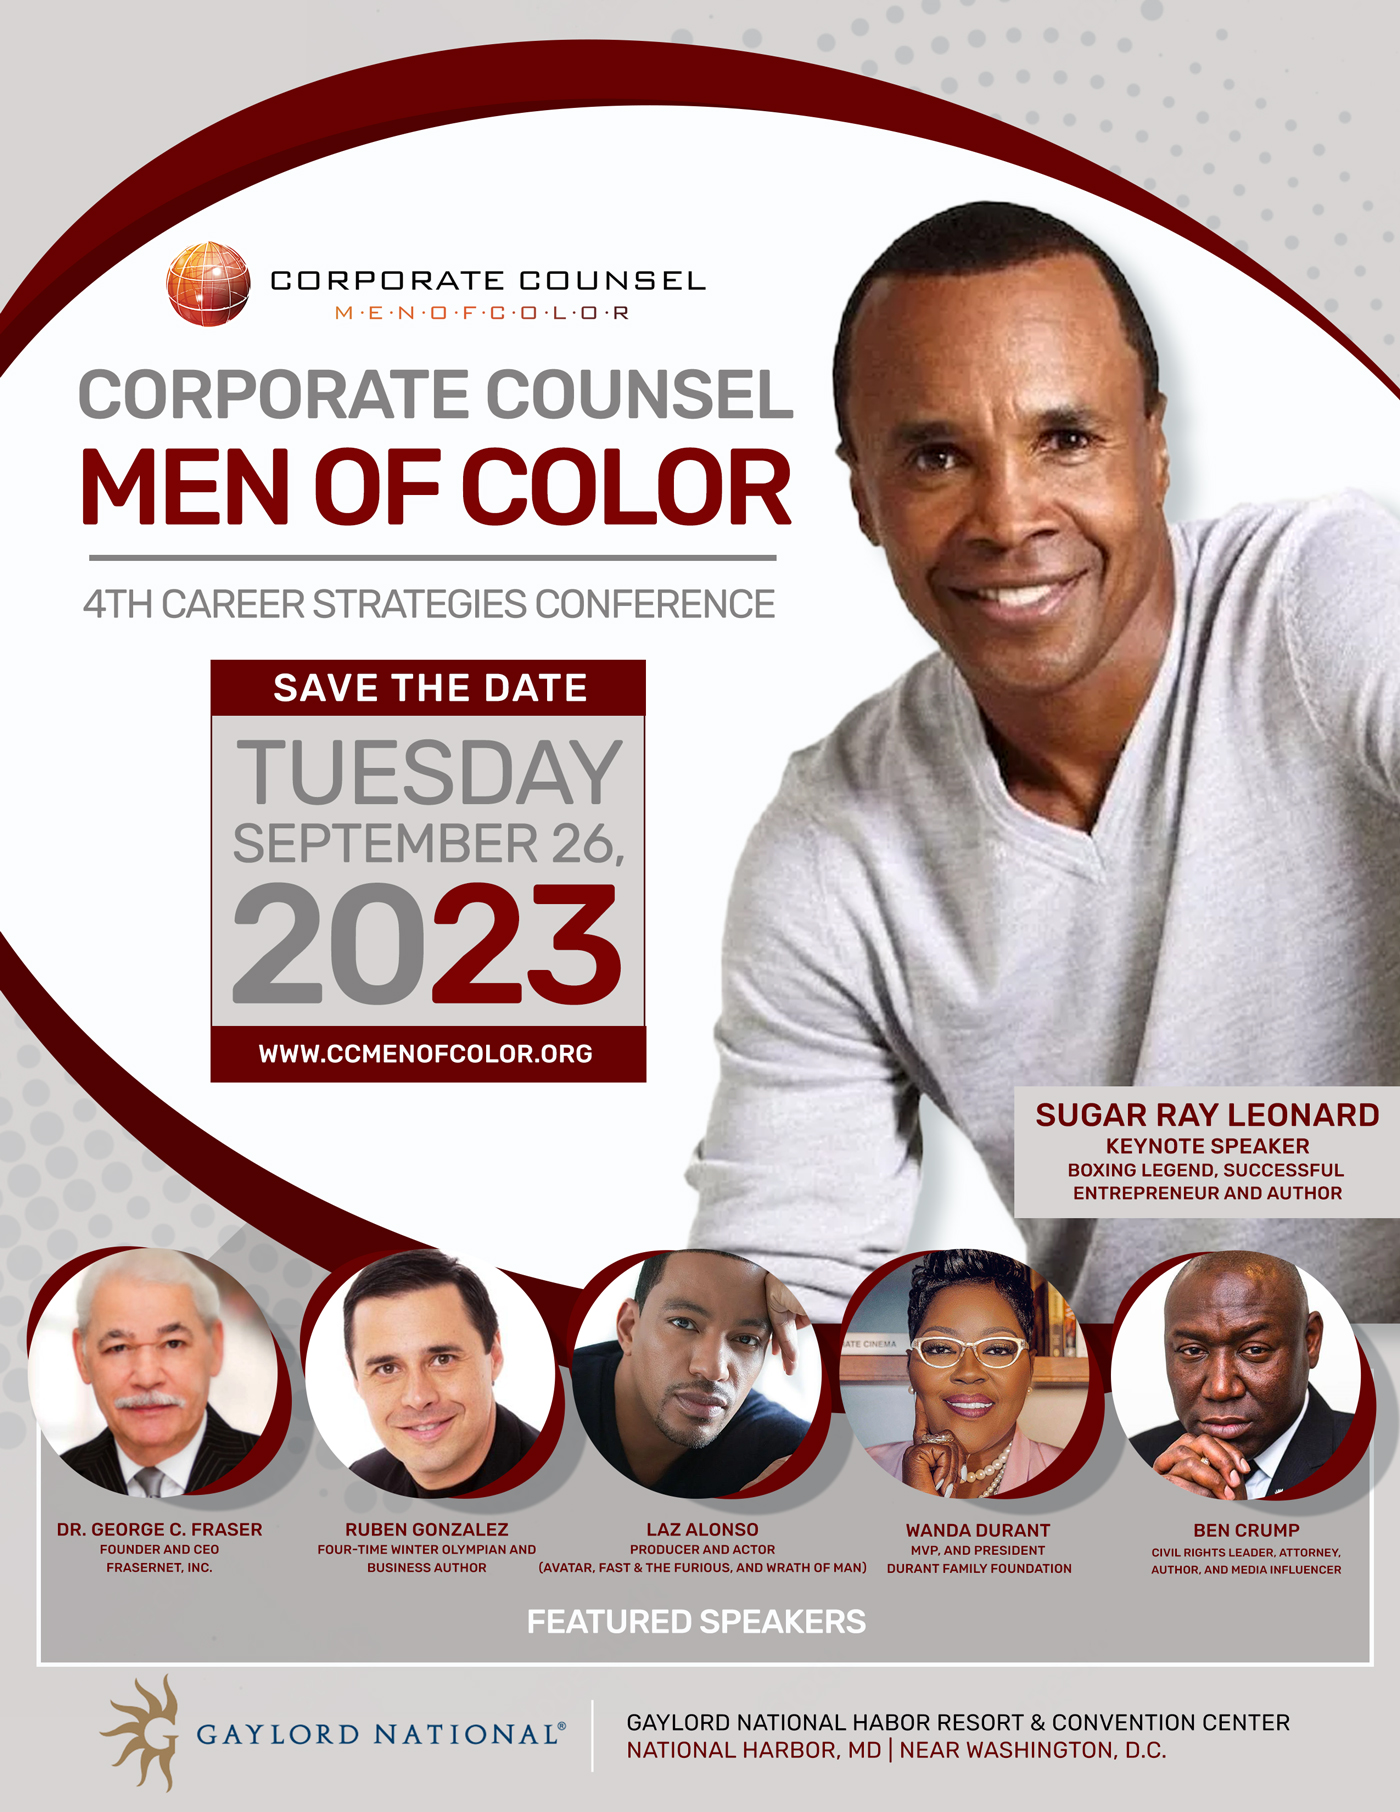 Men of Color Conference Corporate Counsel Men of Color